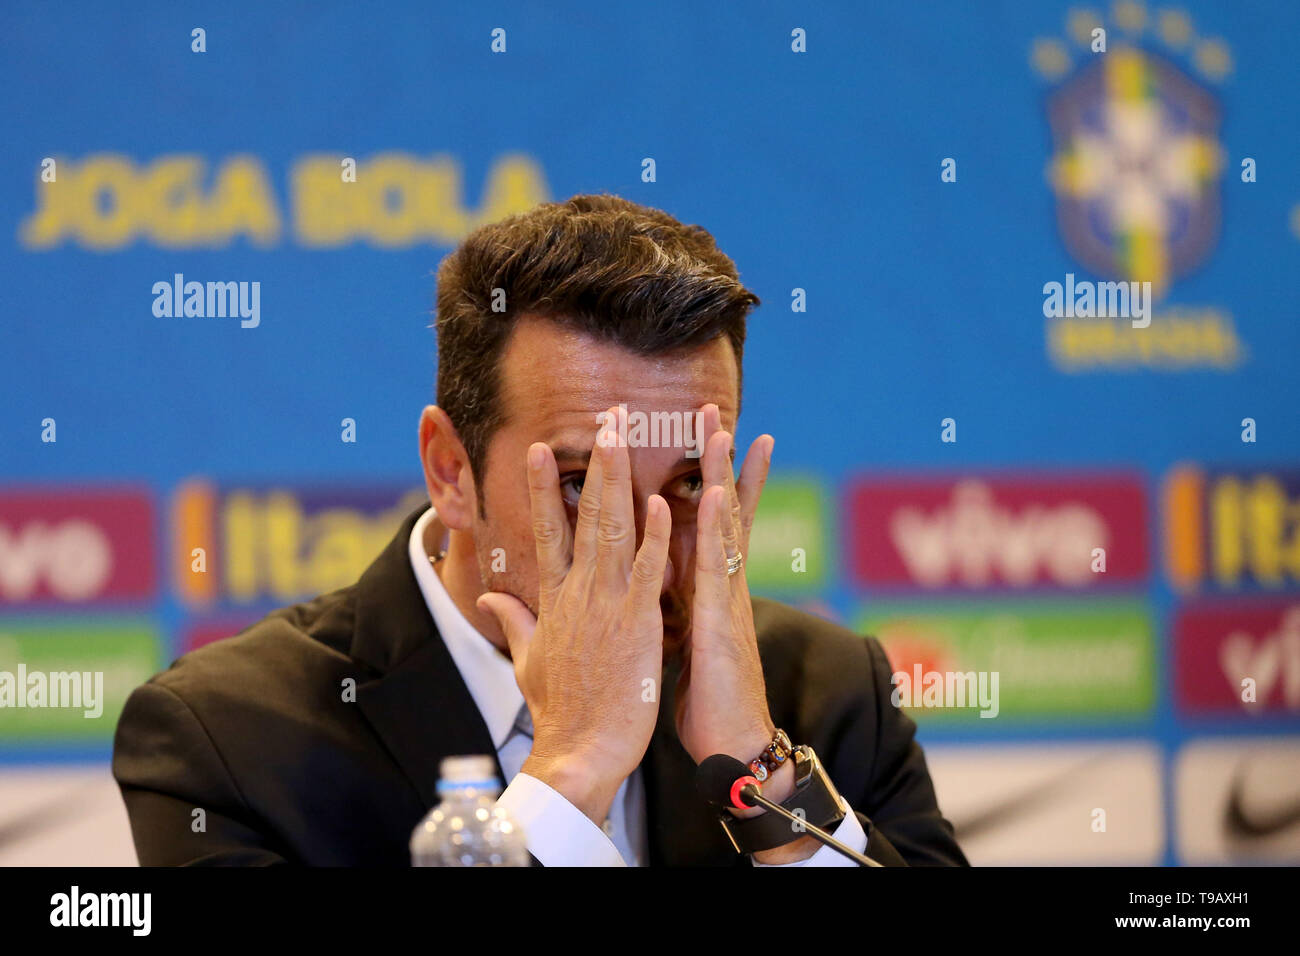 Rio De Janeiro, Brazil. 17th May, 2019. Edu Gaspar, general coordinator of the Brazilian national football team, reacts during a press conference to announce the list of the 23 players for the Copa America 2019 at the headquarter of CBF (Brazilian Football Confederation) in Rio de Janeiro, RJ, Brazil, on May 17, 2019. The tournament will be held from June 14 to July 7 in five cities in Brazil. Credit: Li Ming/Xinhua/Alamy Live News Stock Photo